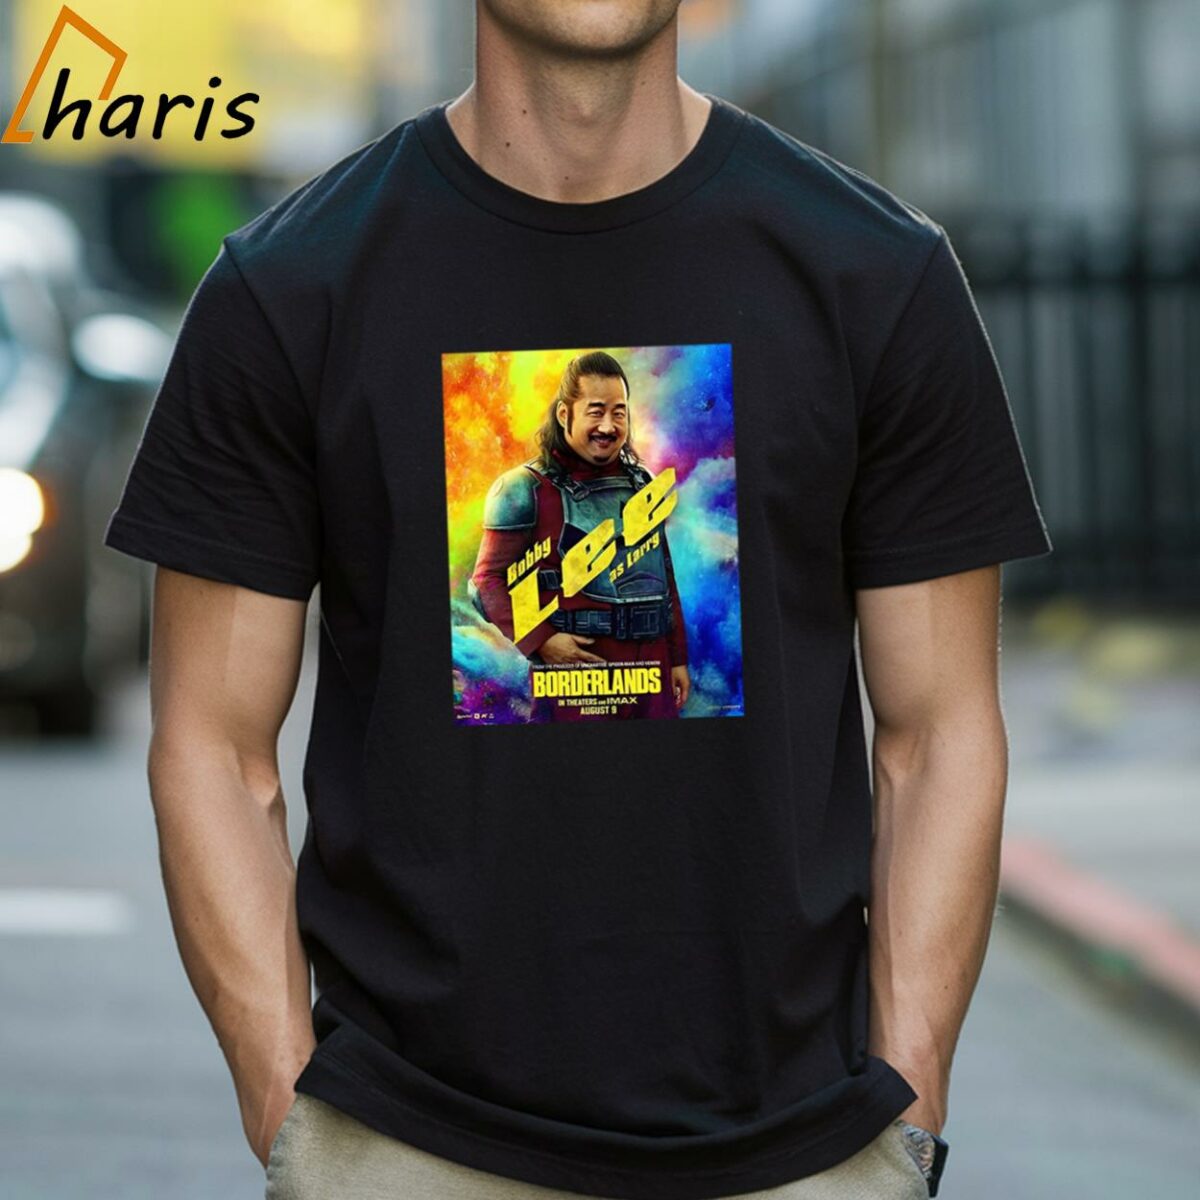 Larry Posters For Borderlands Releasing In Theaters And IMAX On August 9 Classic T Shirt 1 Shirt